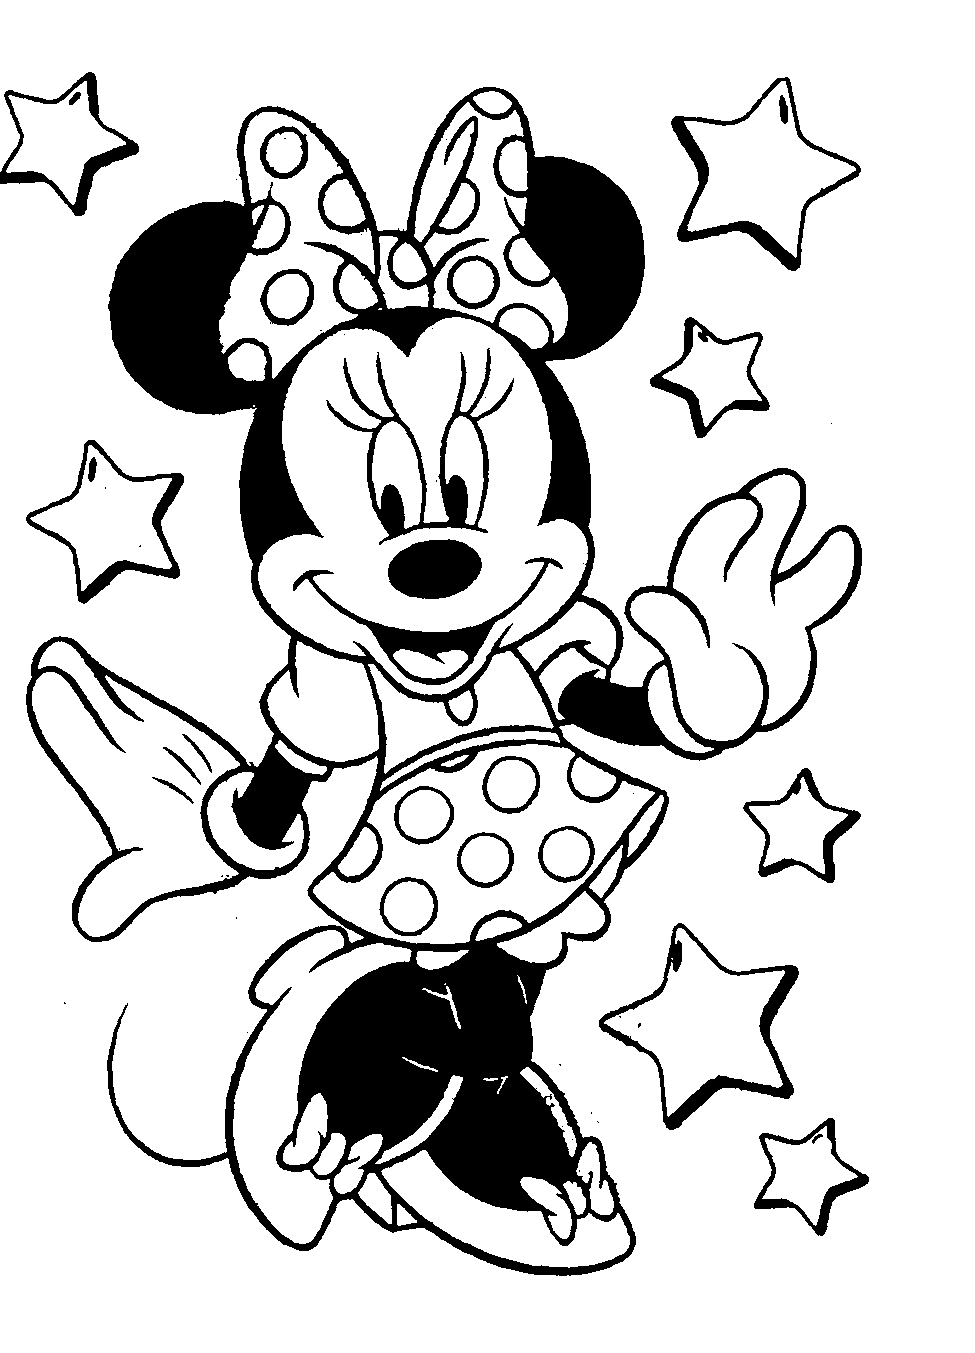 Minnie Mouse Clip Art Black And White   Clipart Panda   Free Clipart